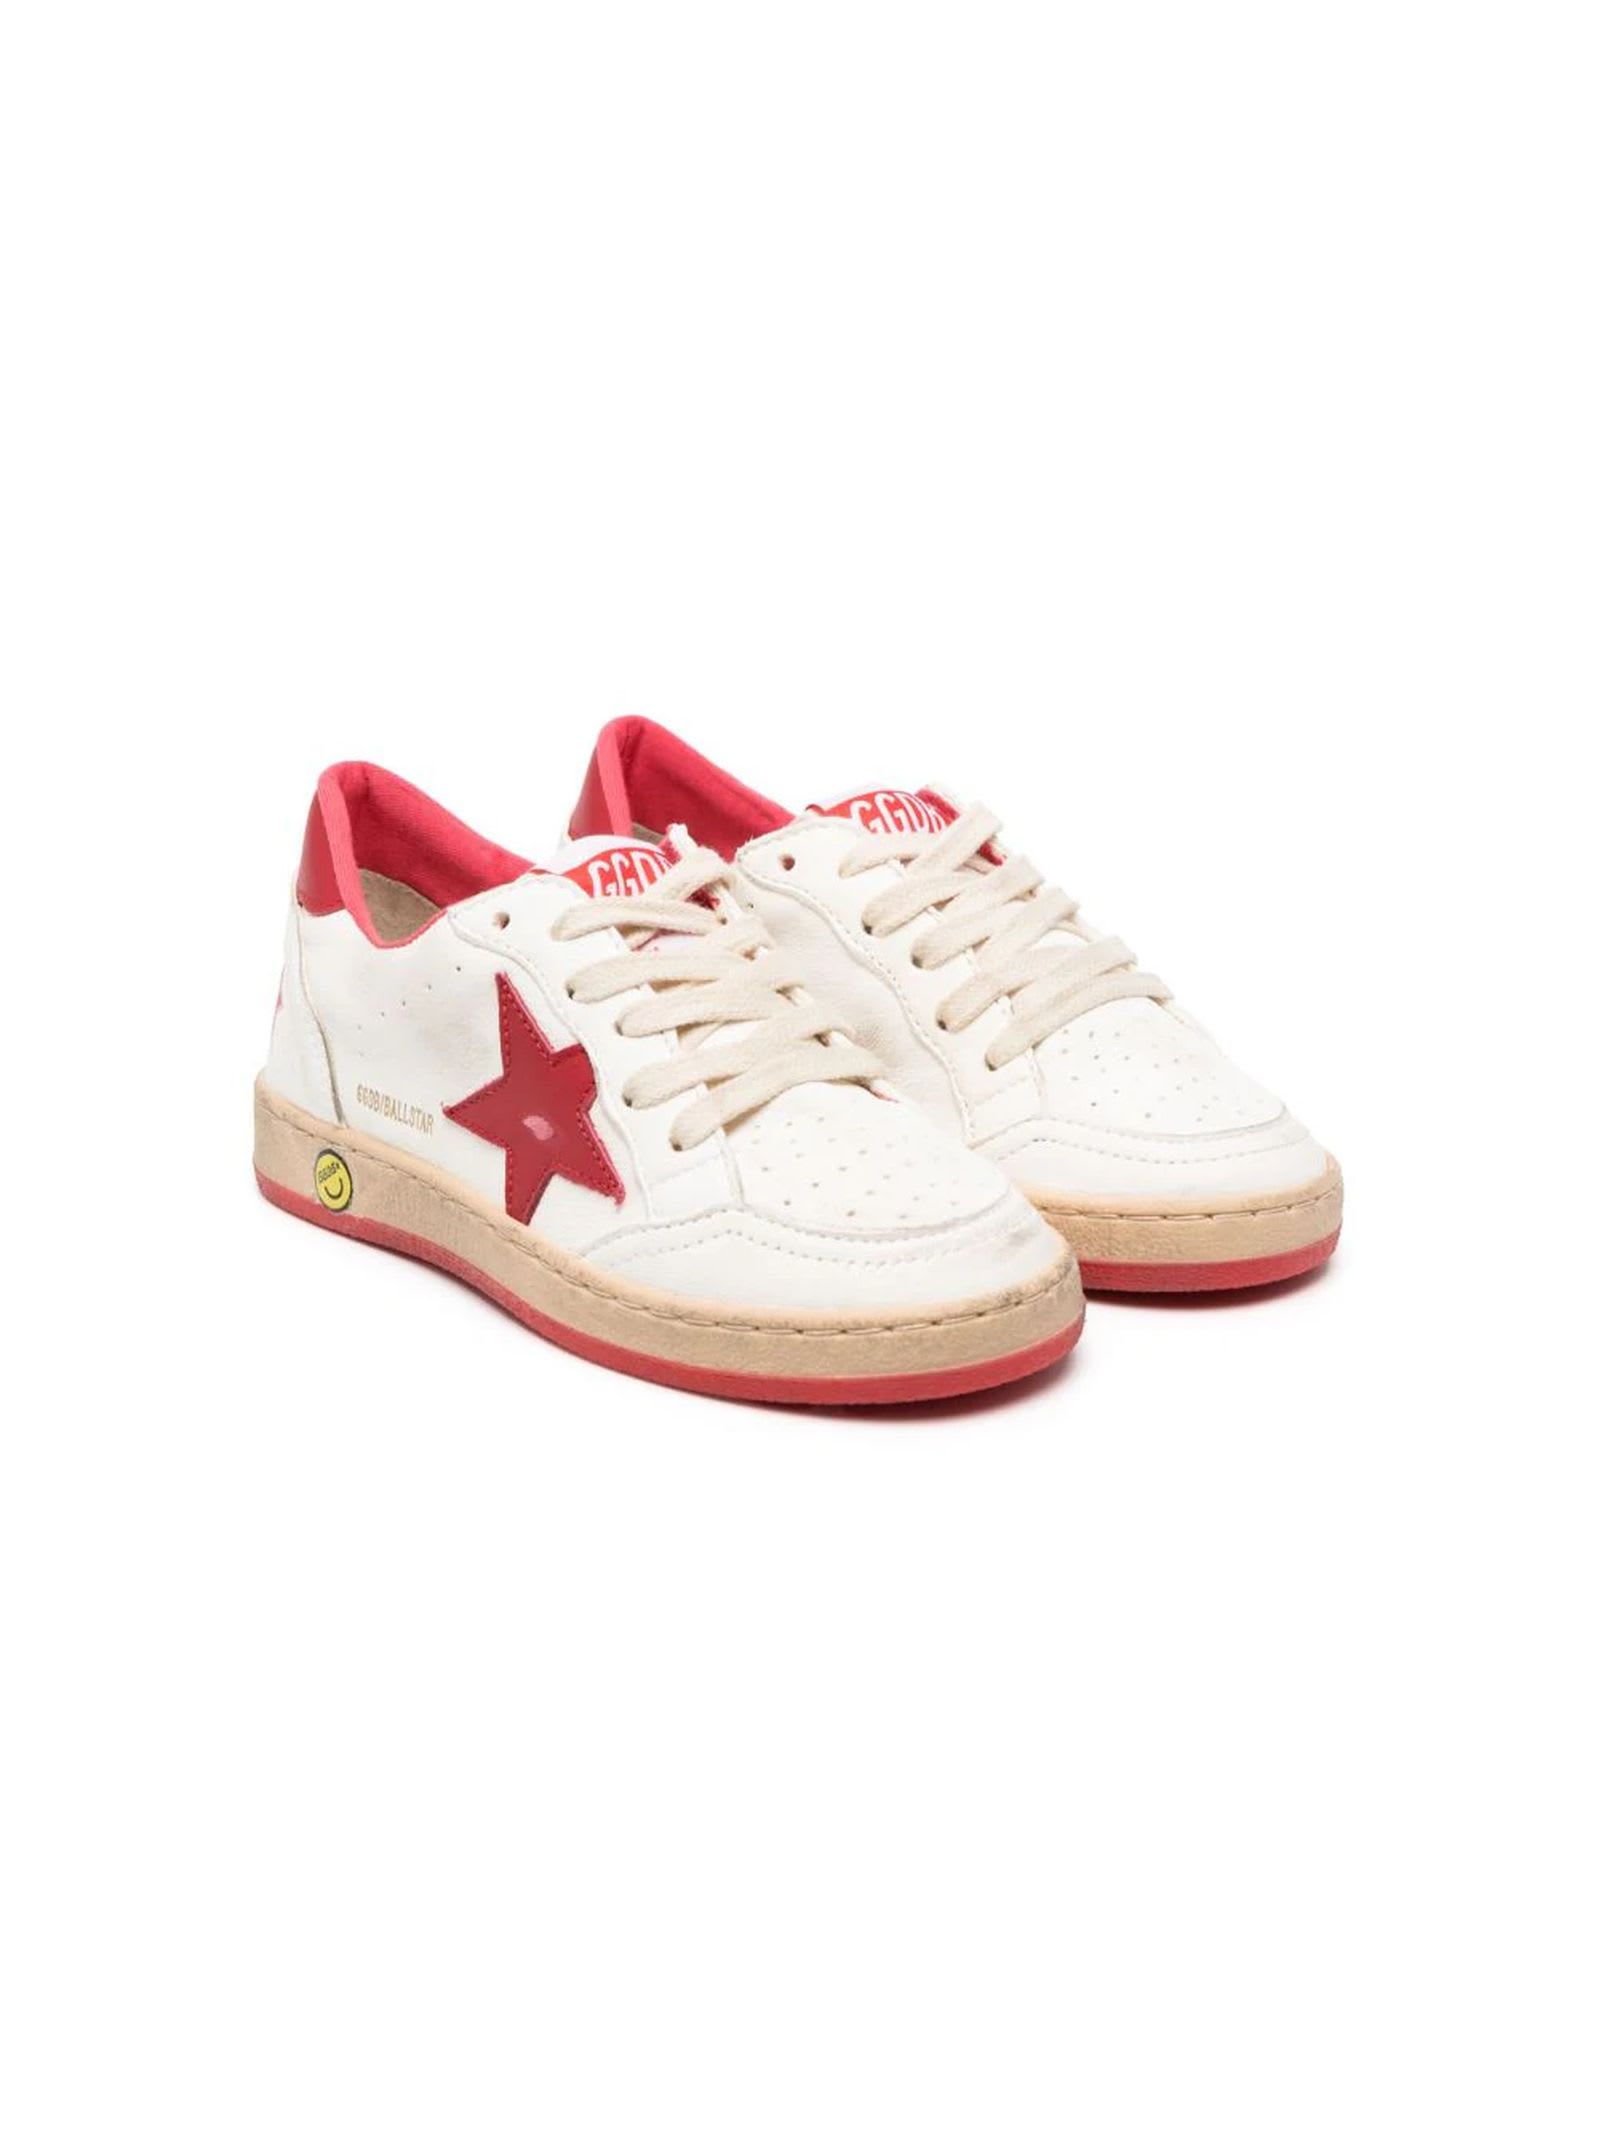 Golden Goose White And Red Calf Leather Sneakers